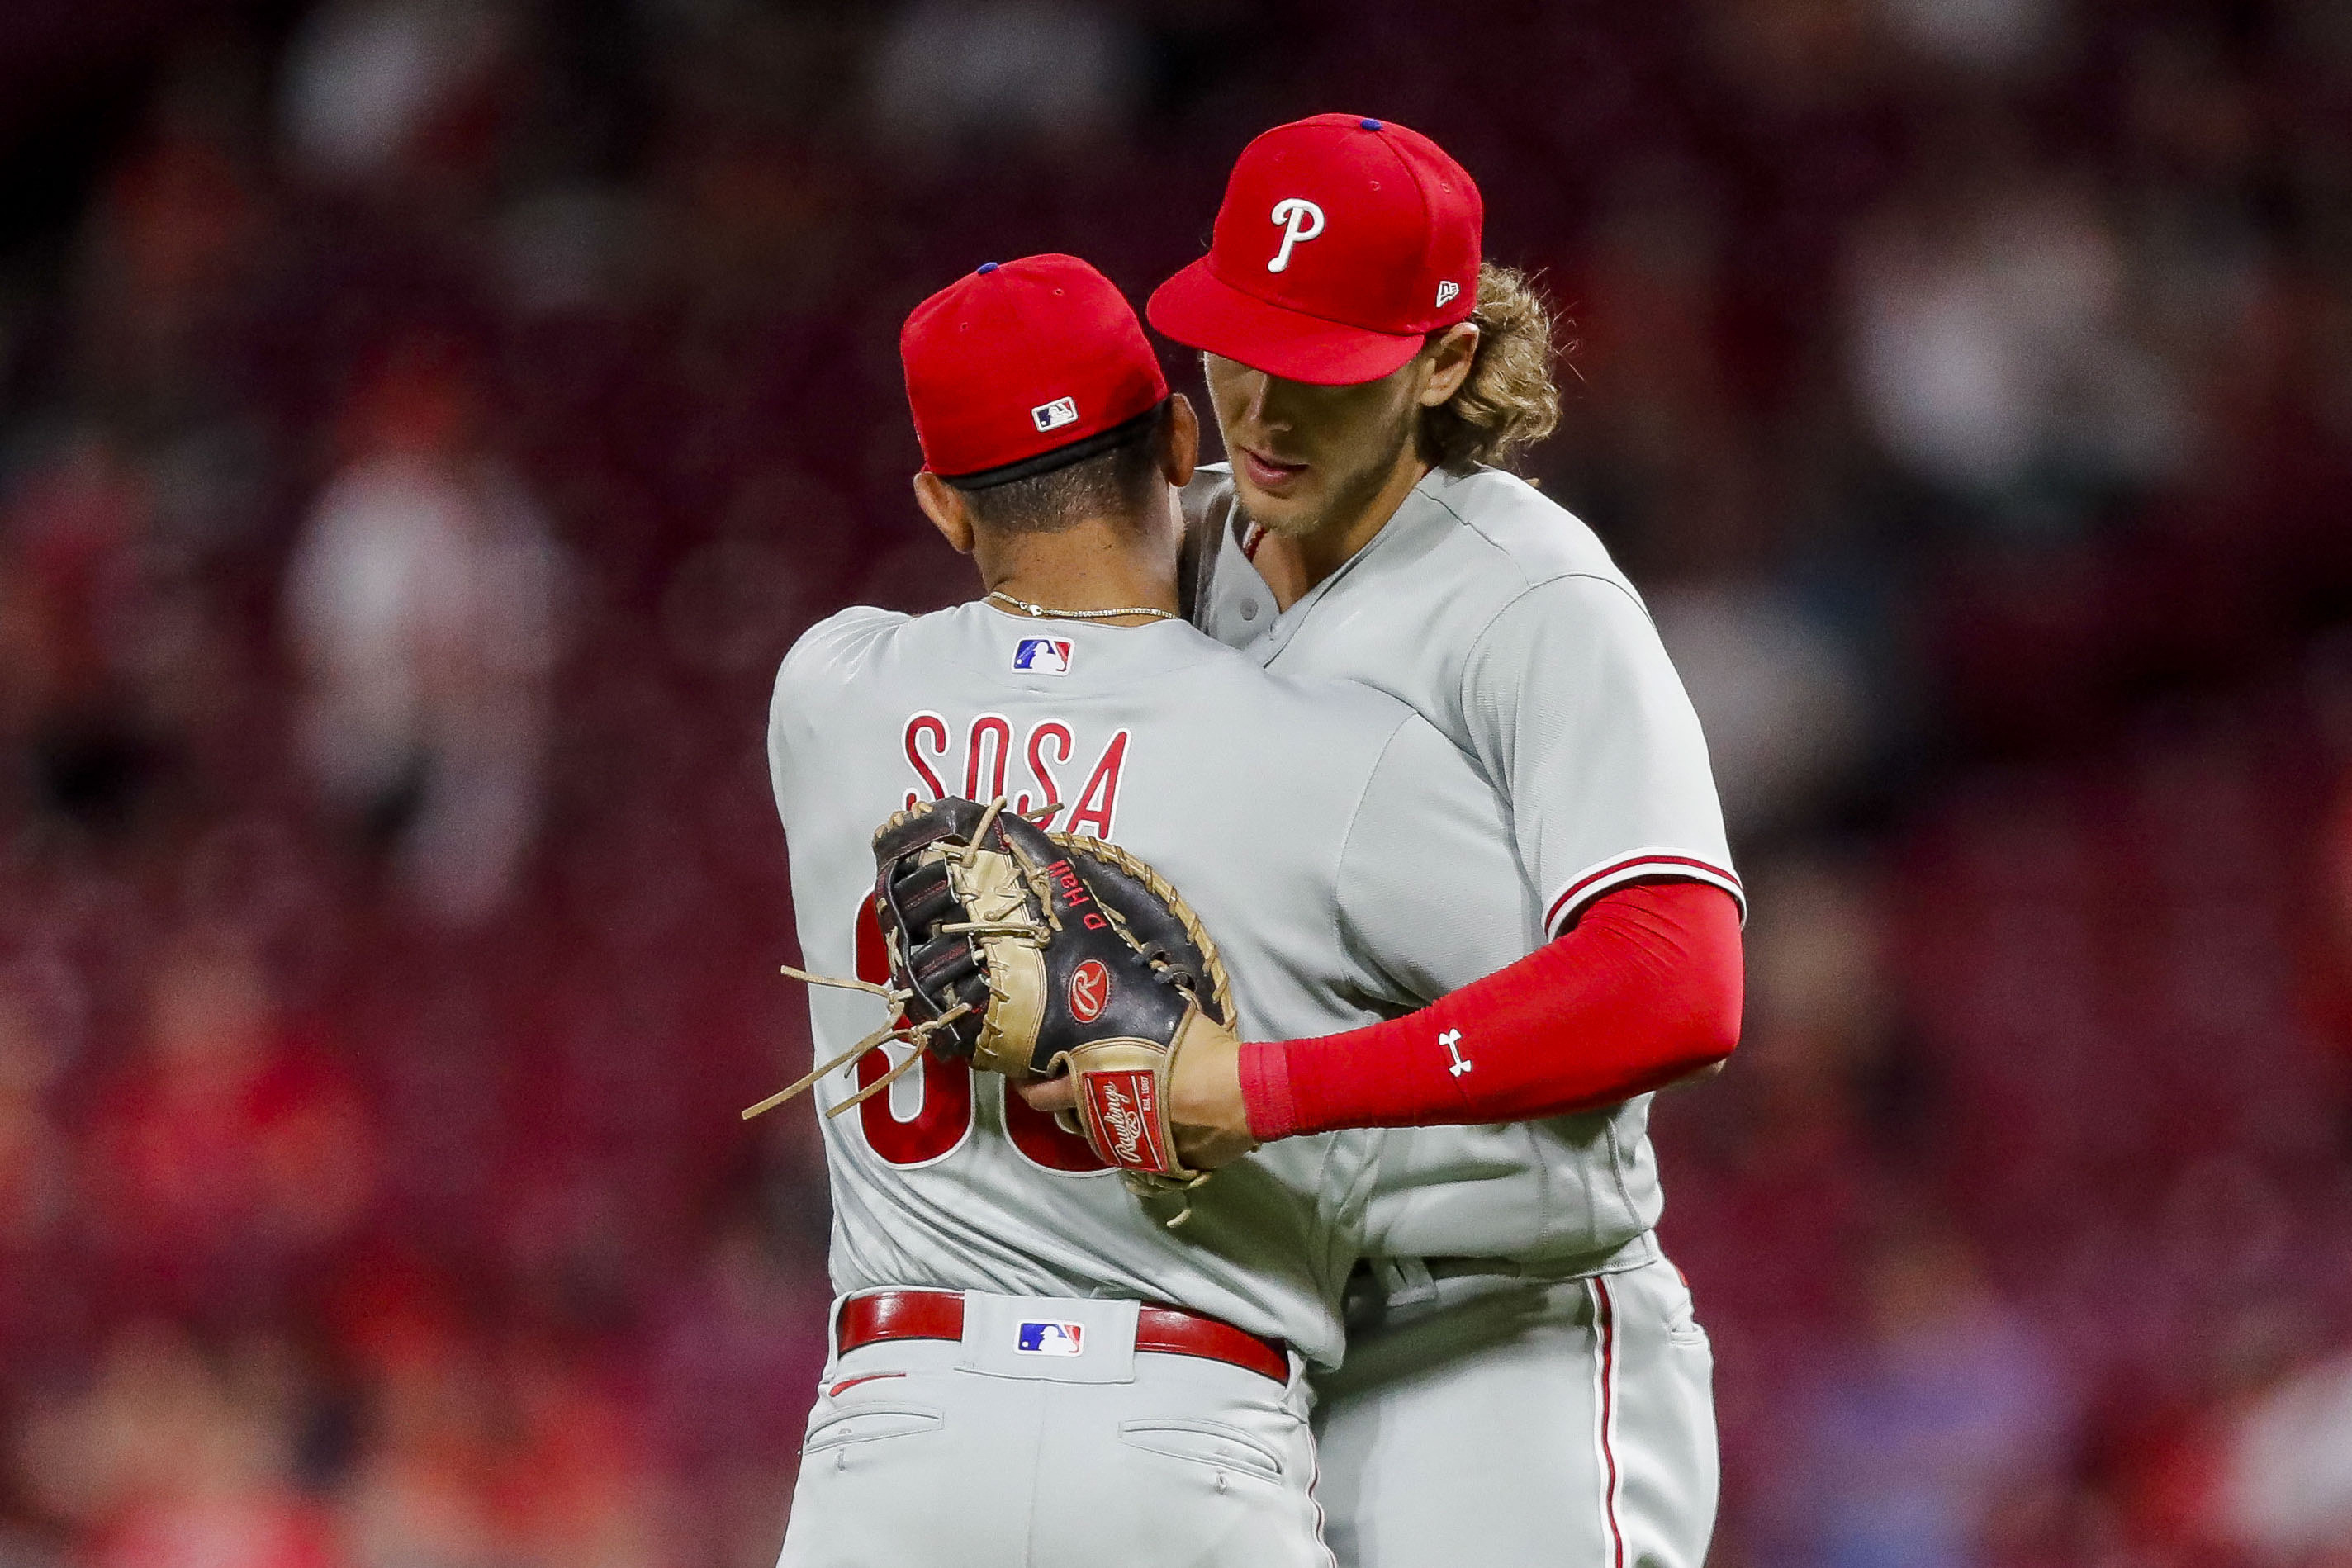 Phillies end 3-game skid by routing Reds